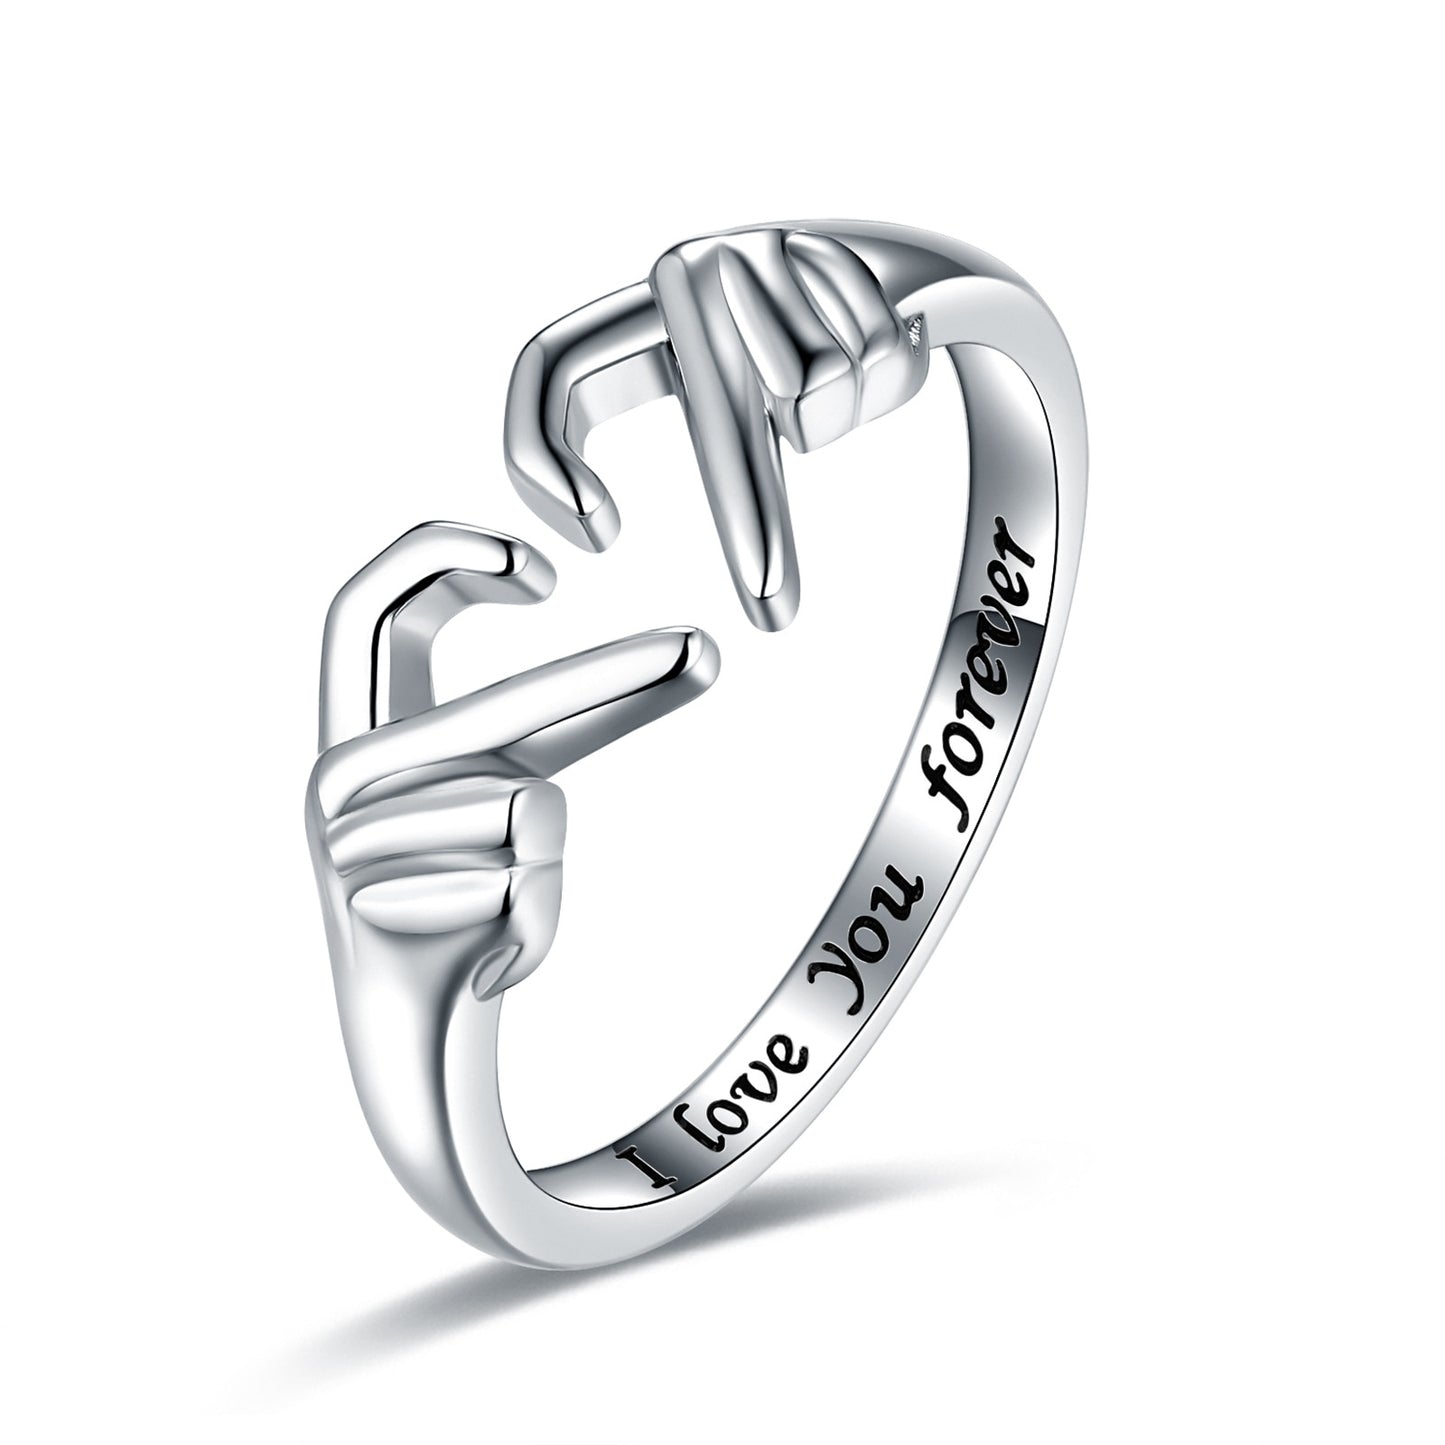 Rings Adjustable Gothic Hug Muscle Hands